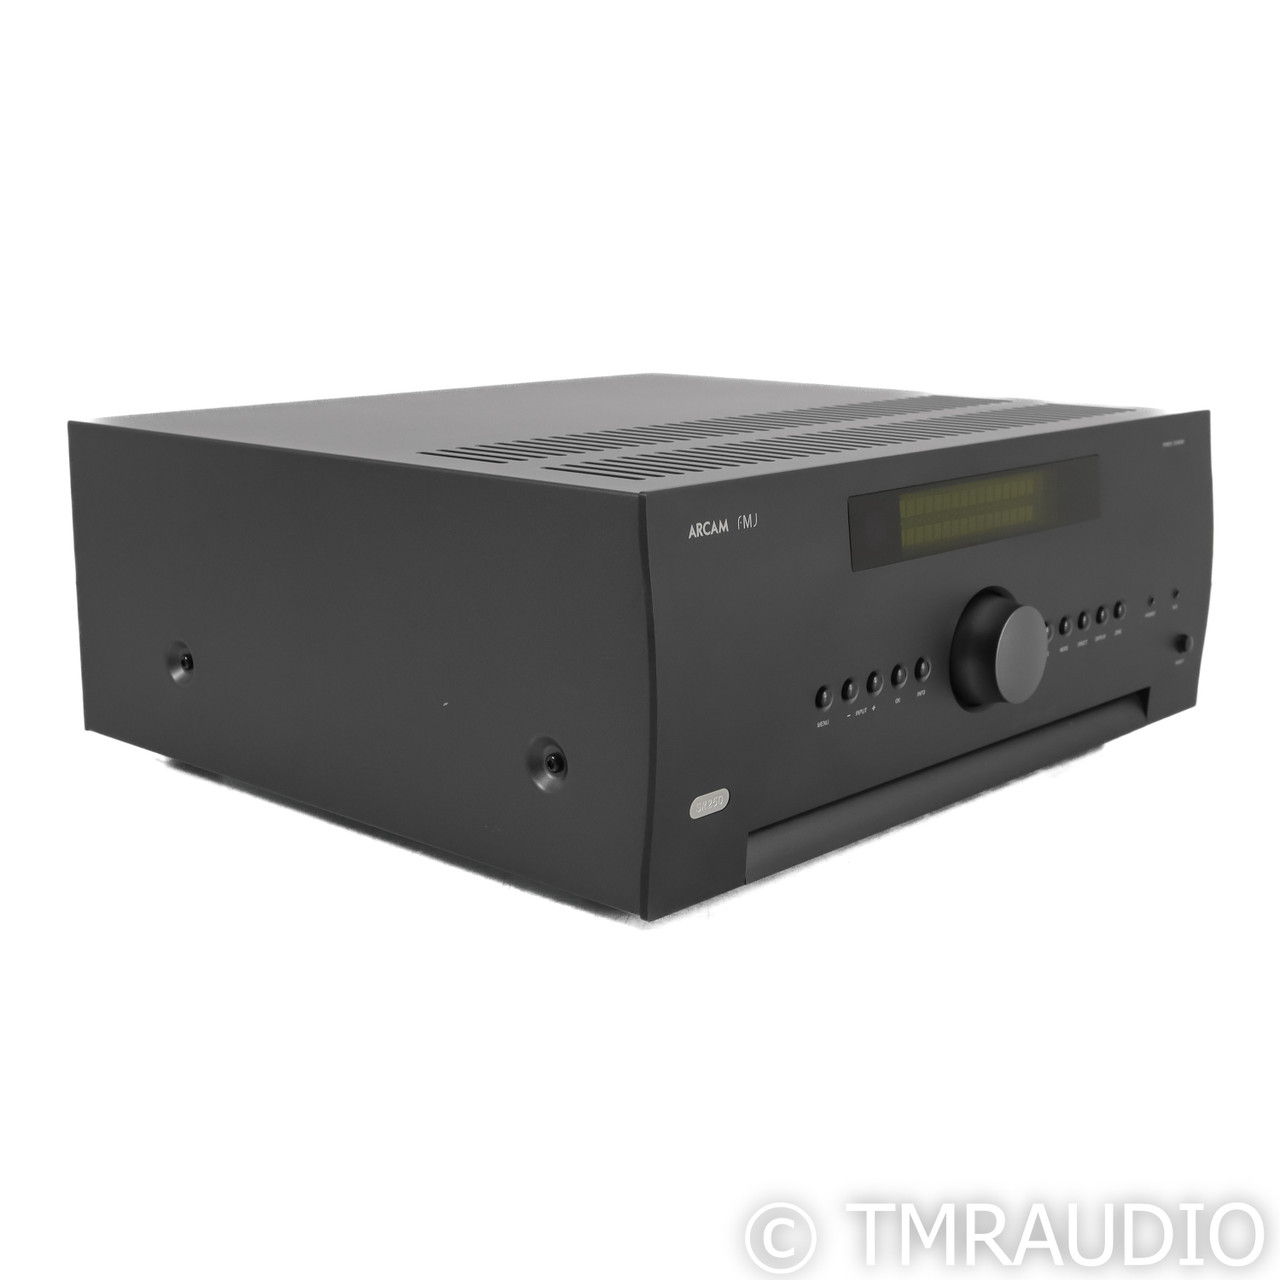 Arcam FMJ SR250 Stereo Home Theater Receiver (64414) 2